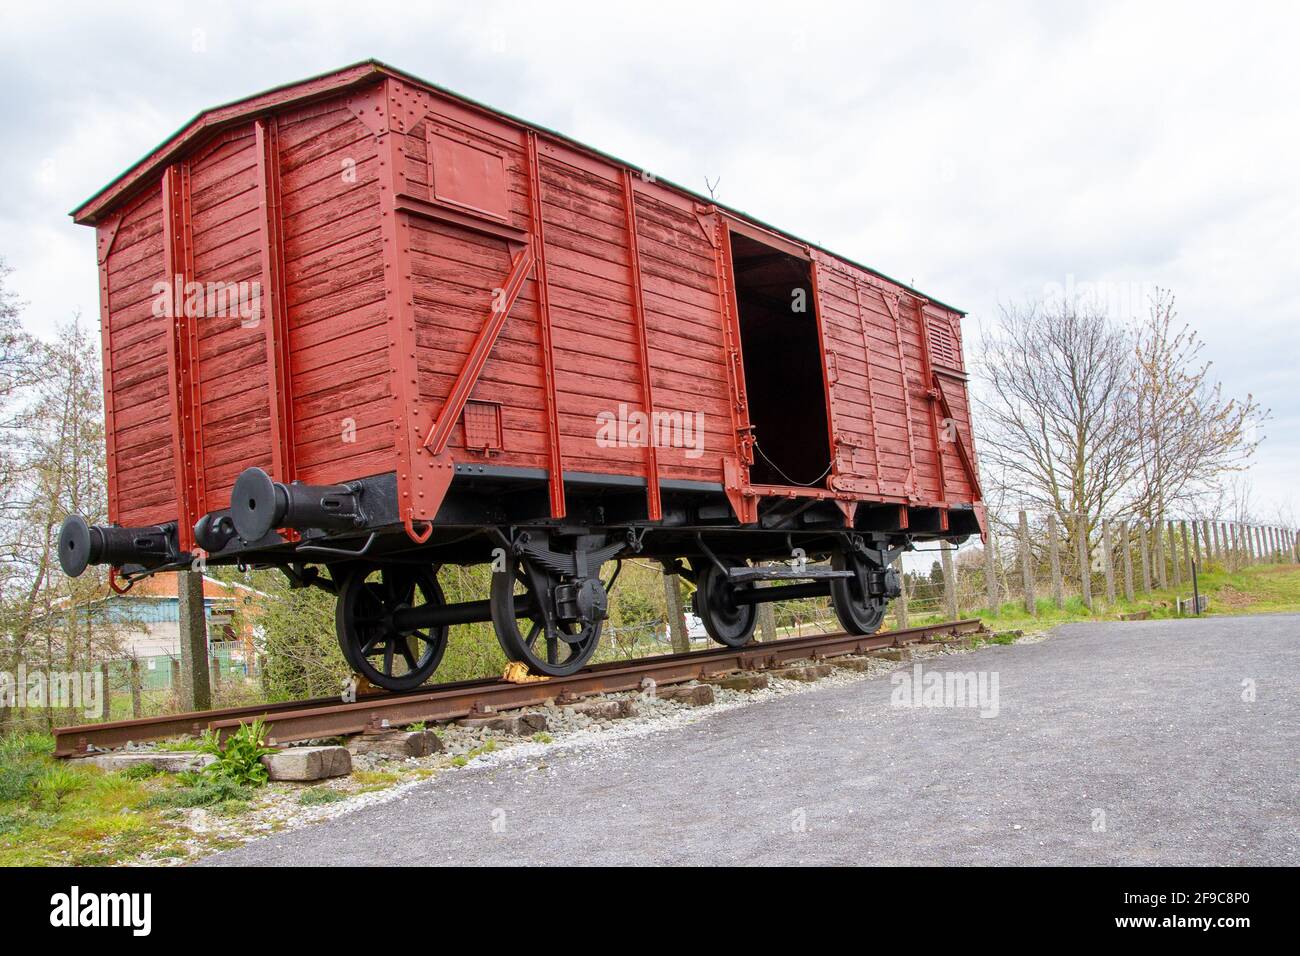 Belgium, Puurs, April 16, 2021. Fort Breendonk was a concentration camp during WWII, cattle wagon for transporting prisoners Stock Photo